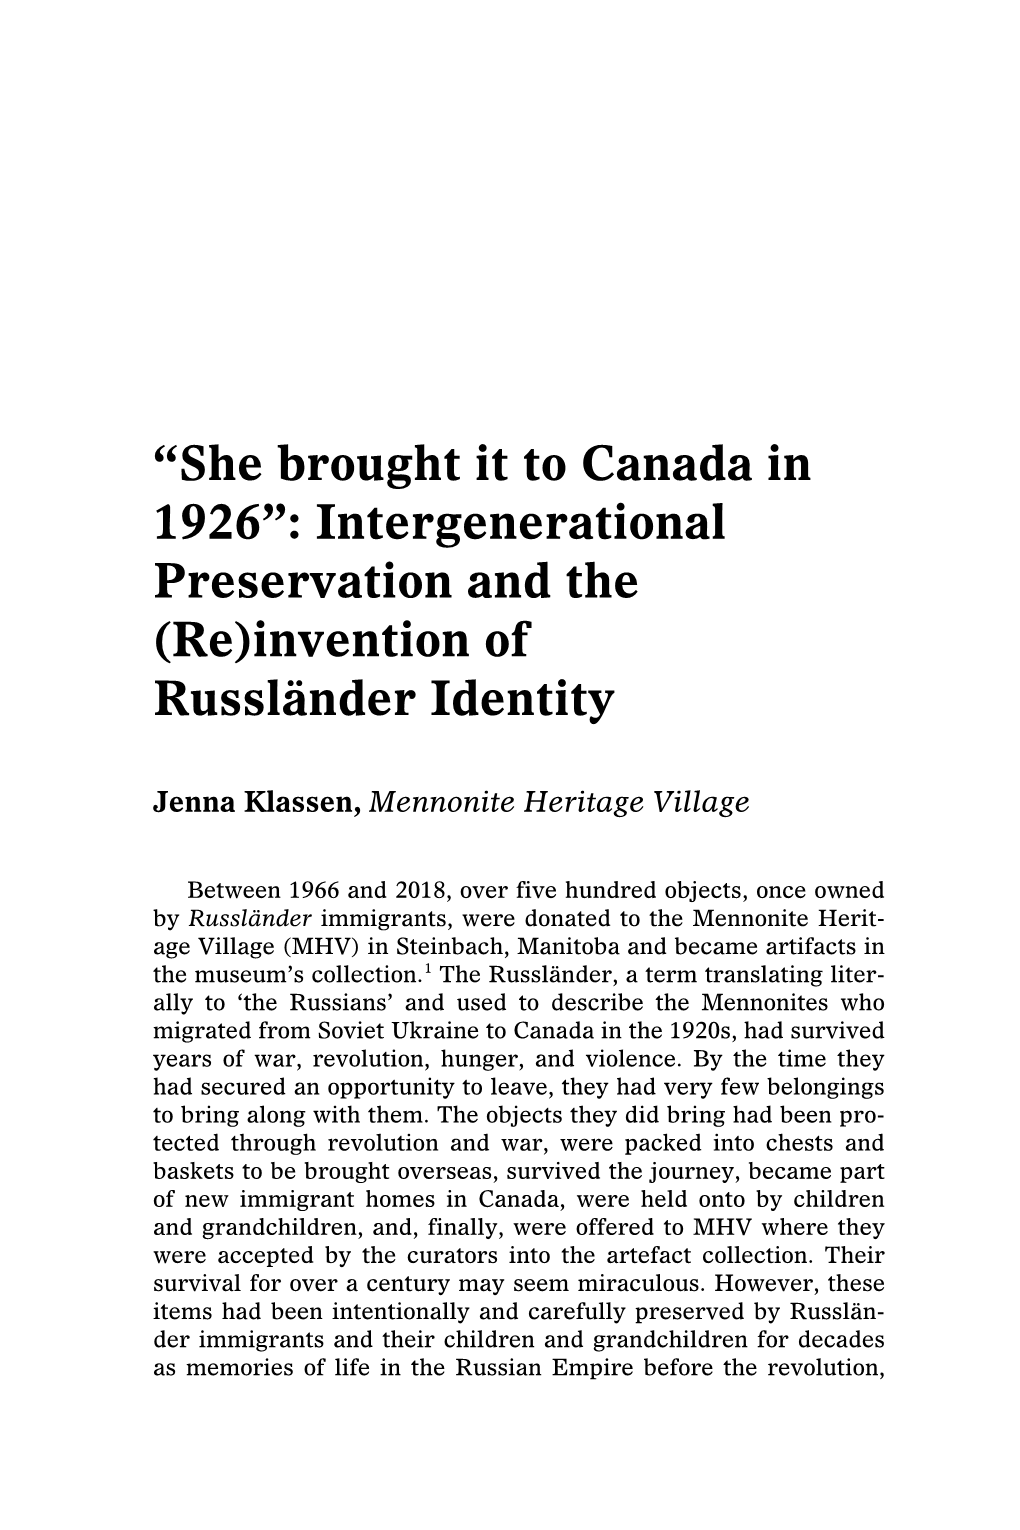 Intergenerational Preservation and the (Re)Invention of Russländer Identity